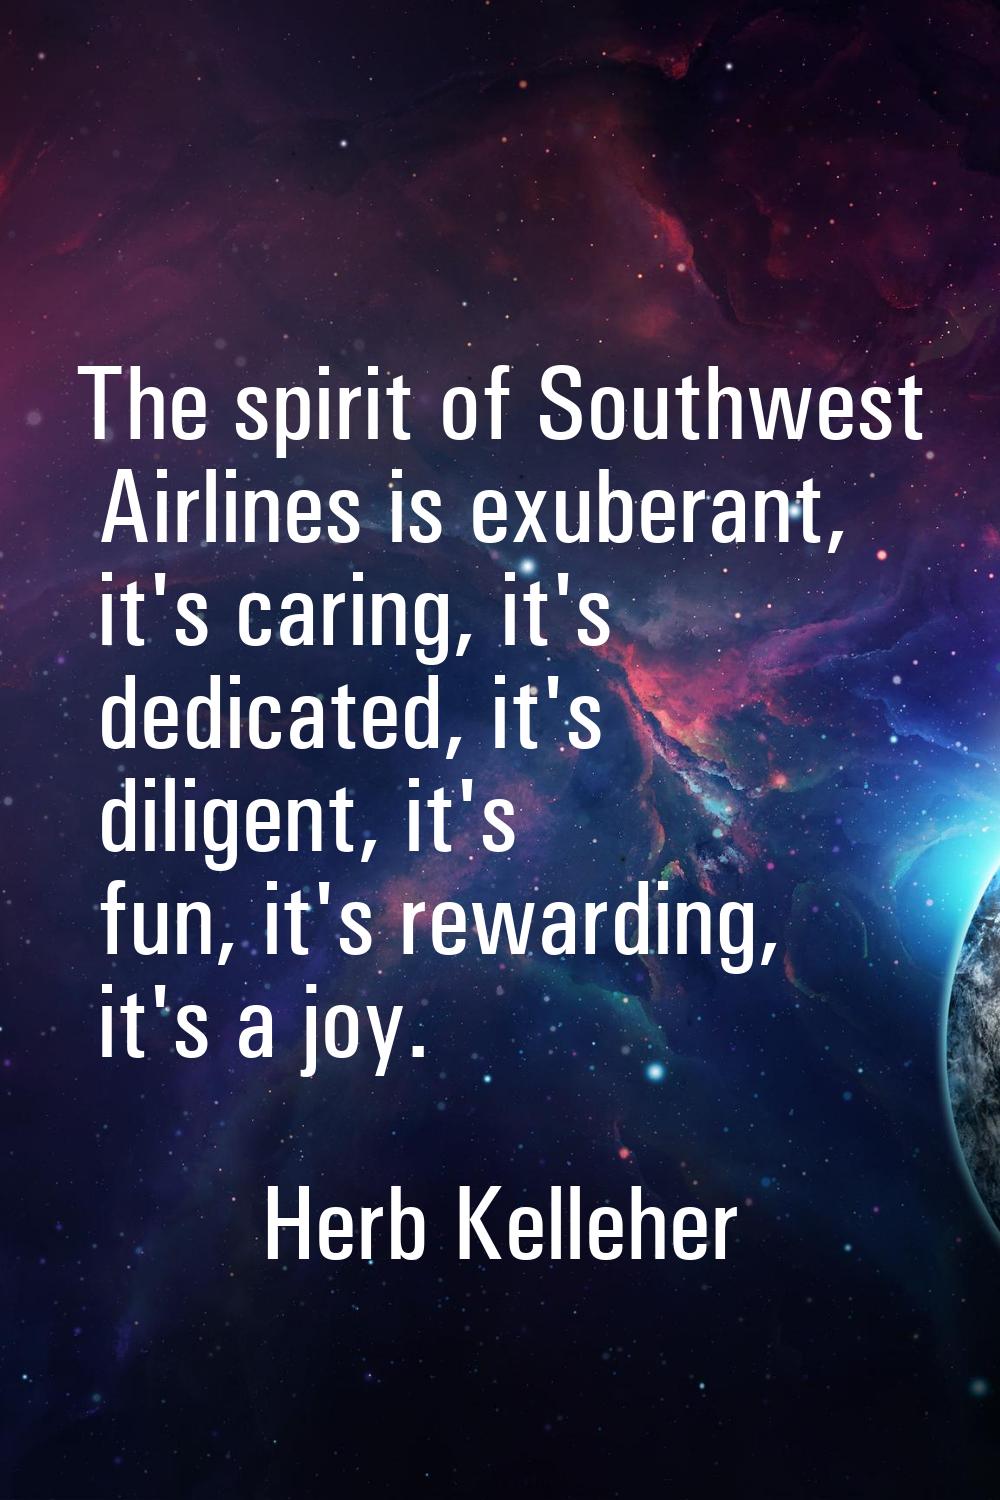 The spirit of Southwest Airlines is exuberant, it's caring, it's dedicated, it's diligent, it's fun